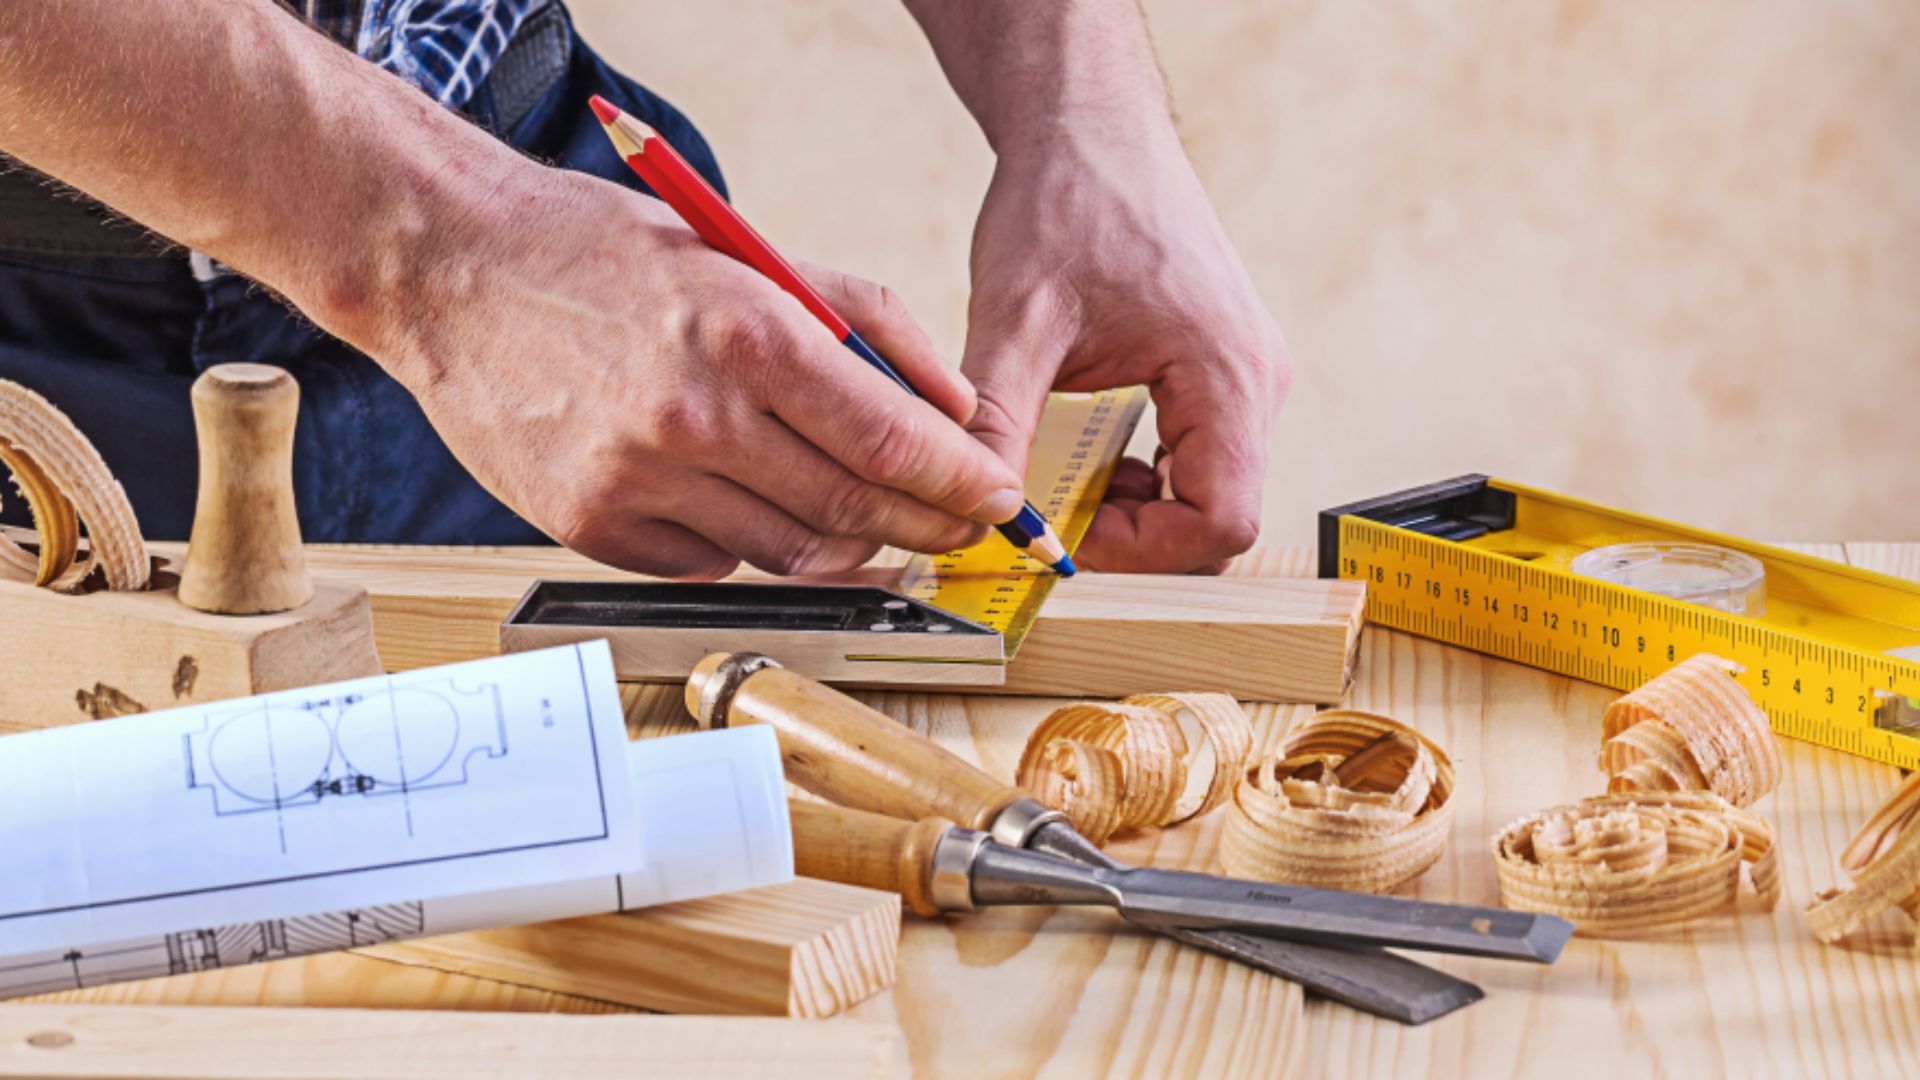 The Ultimate Guide to Hiring Carpenter Services in Dubai